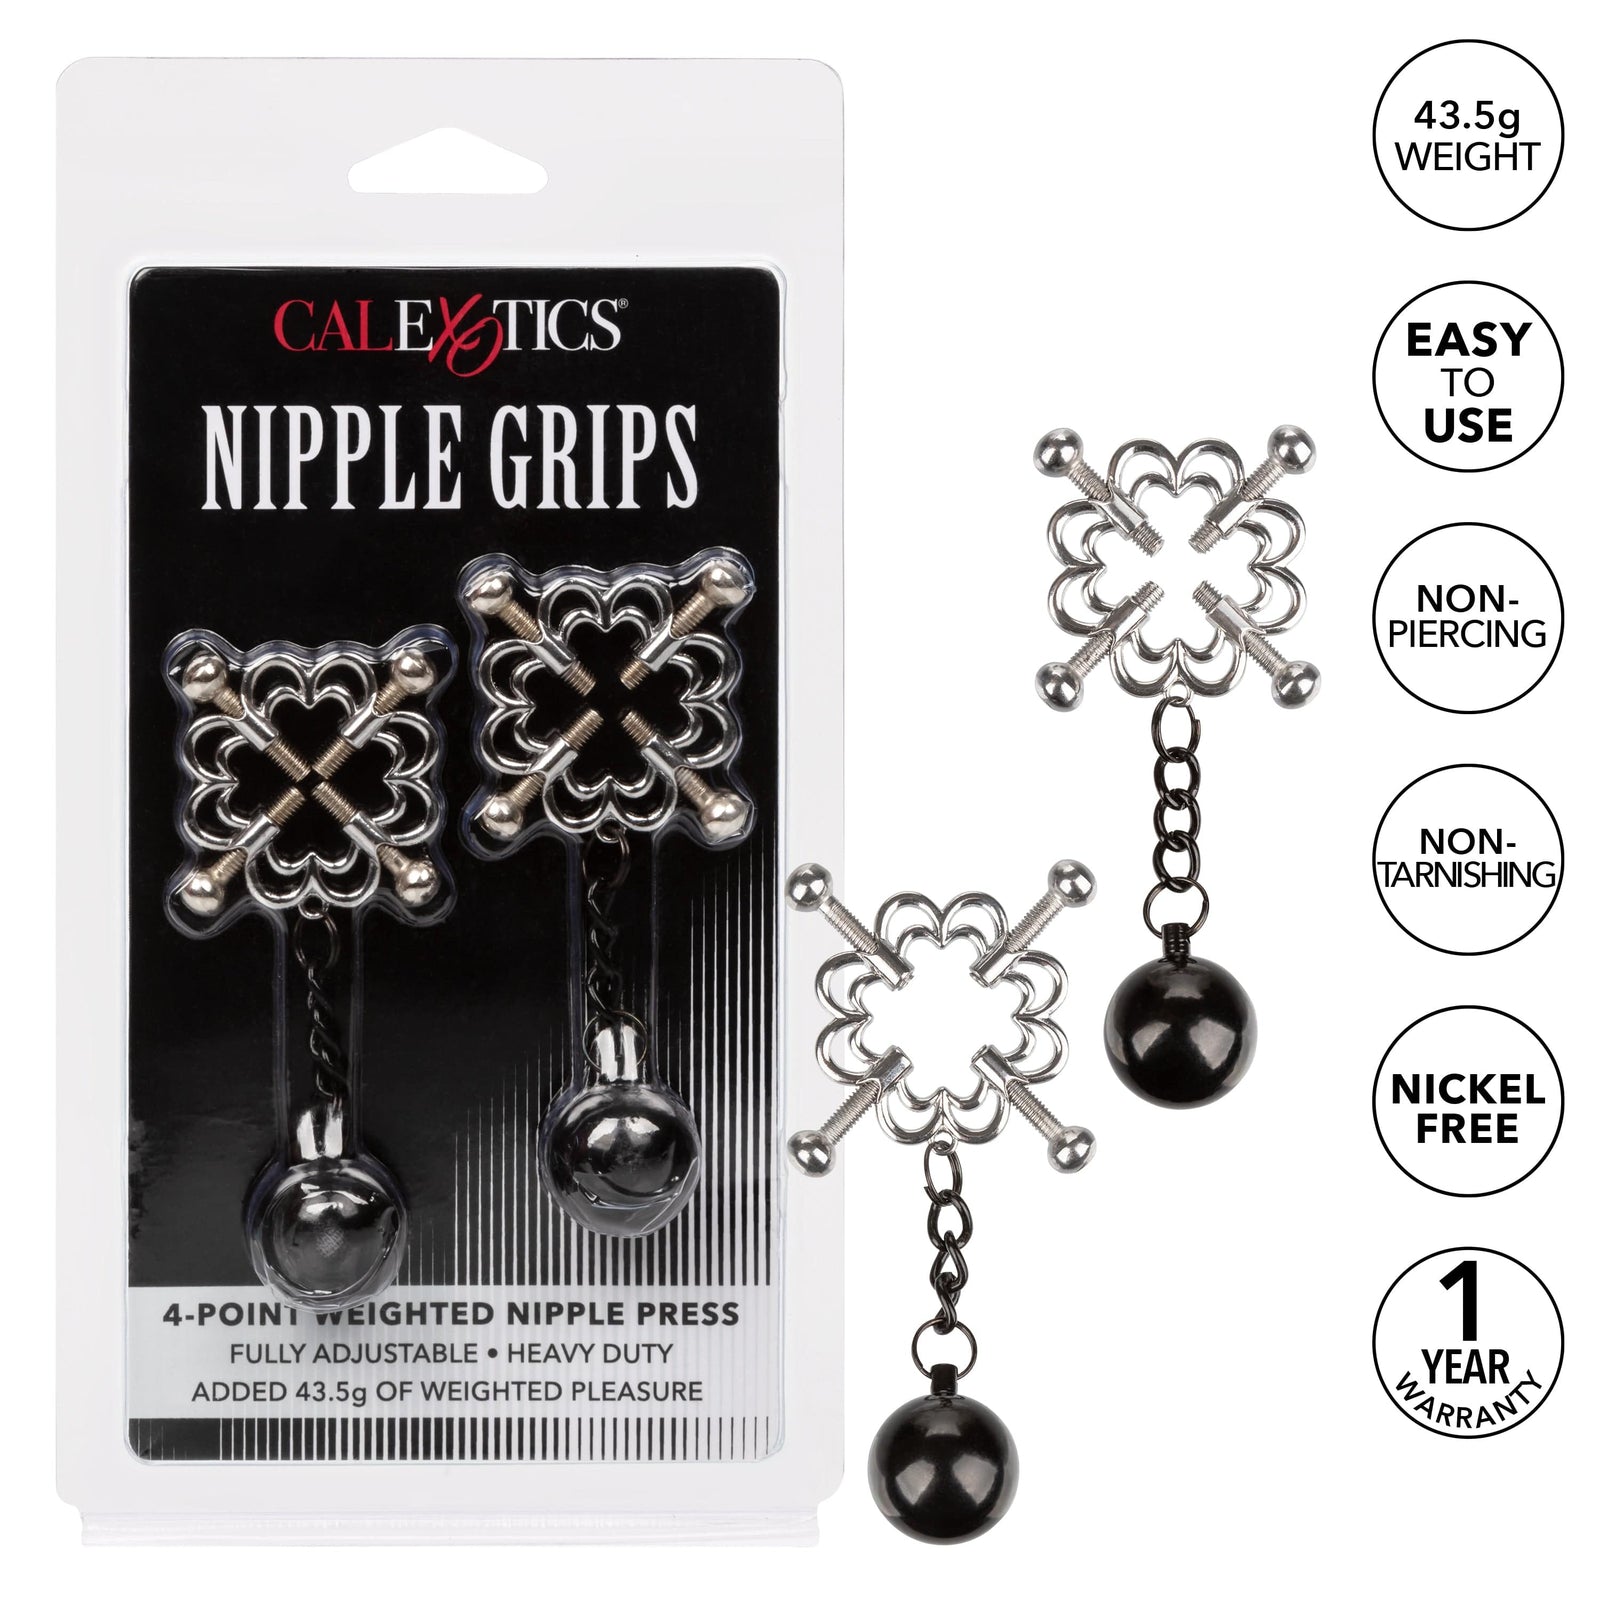 California Exotics - Nipple Grips 4 Point Weighted Nipple Press Clamps (Silver) Nipple Clamps (Non Vibration) 716770097446 CherryAffairs